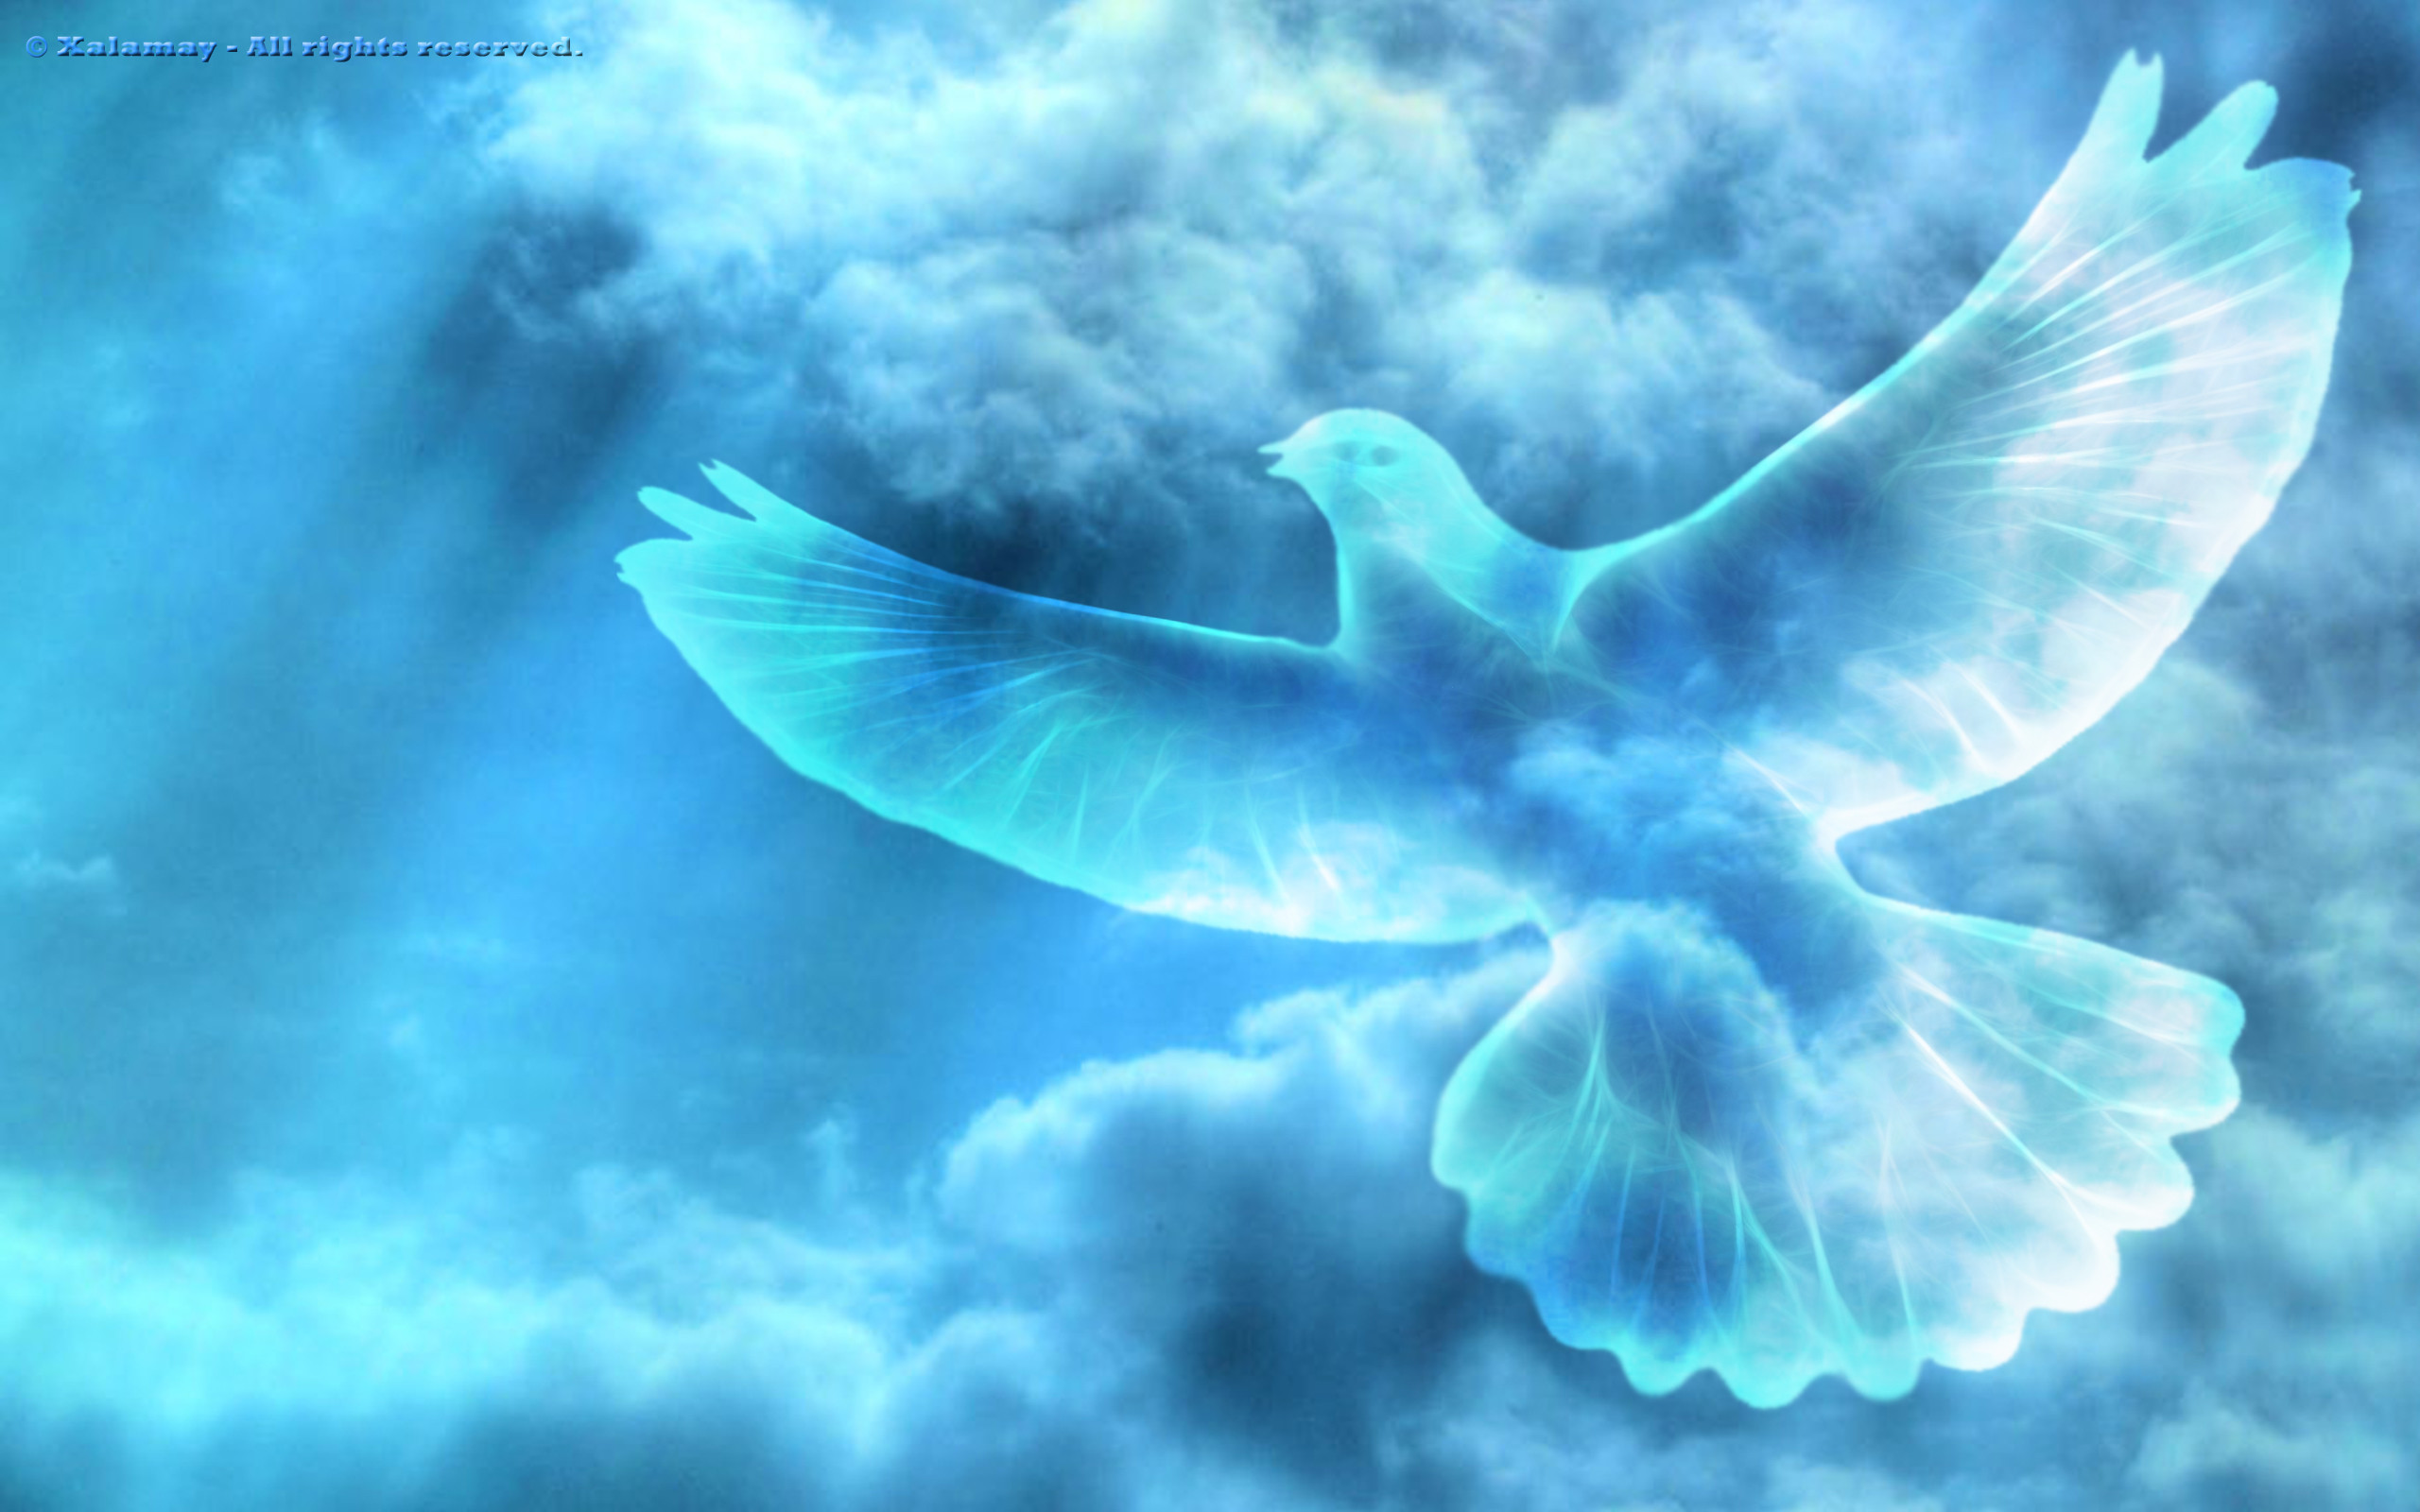 White Dove With An Olive Branchsymbol Of Peace Hd Wallpapers For Laptop  Widescreen Free Download  Wallpapers13com